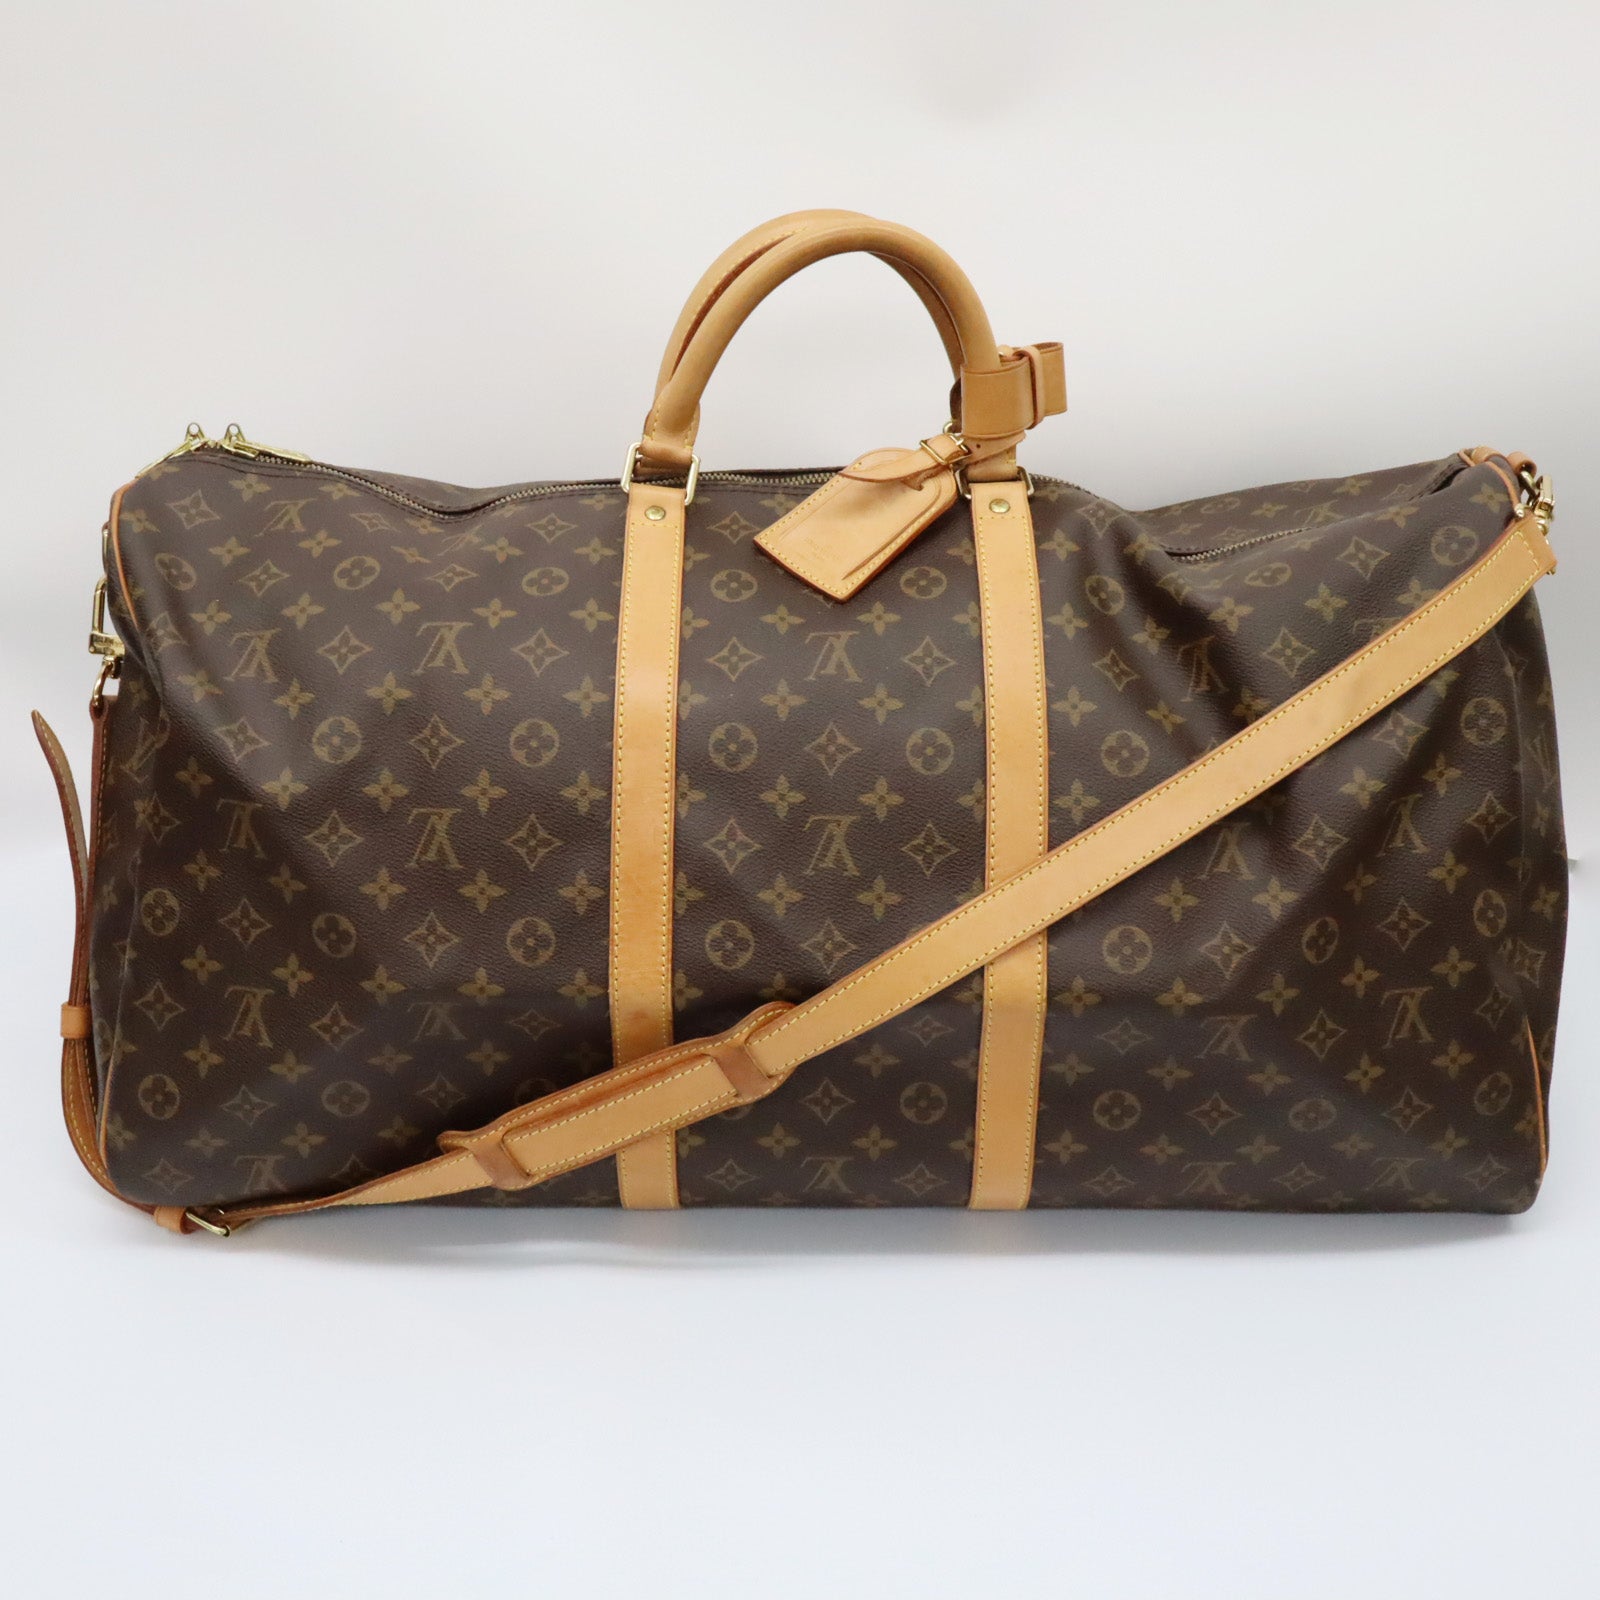 Authentic Louis Vuitton Naviglio Messenger Bag N45255 used once Mint  Condition*